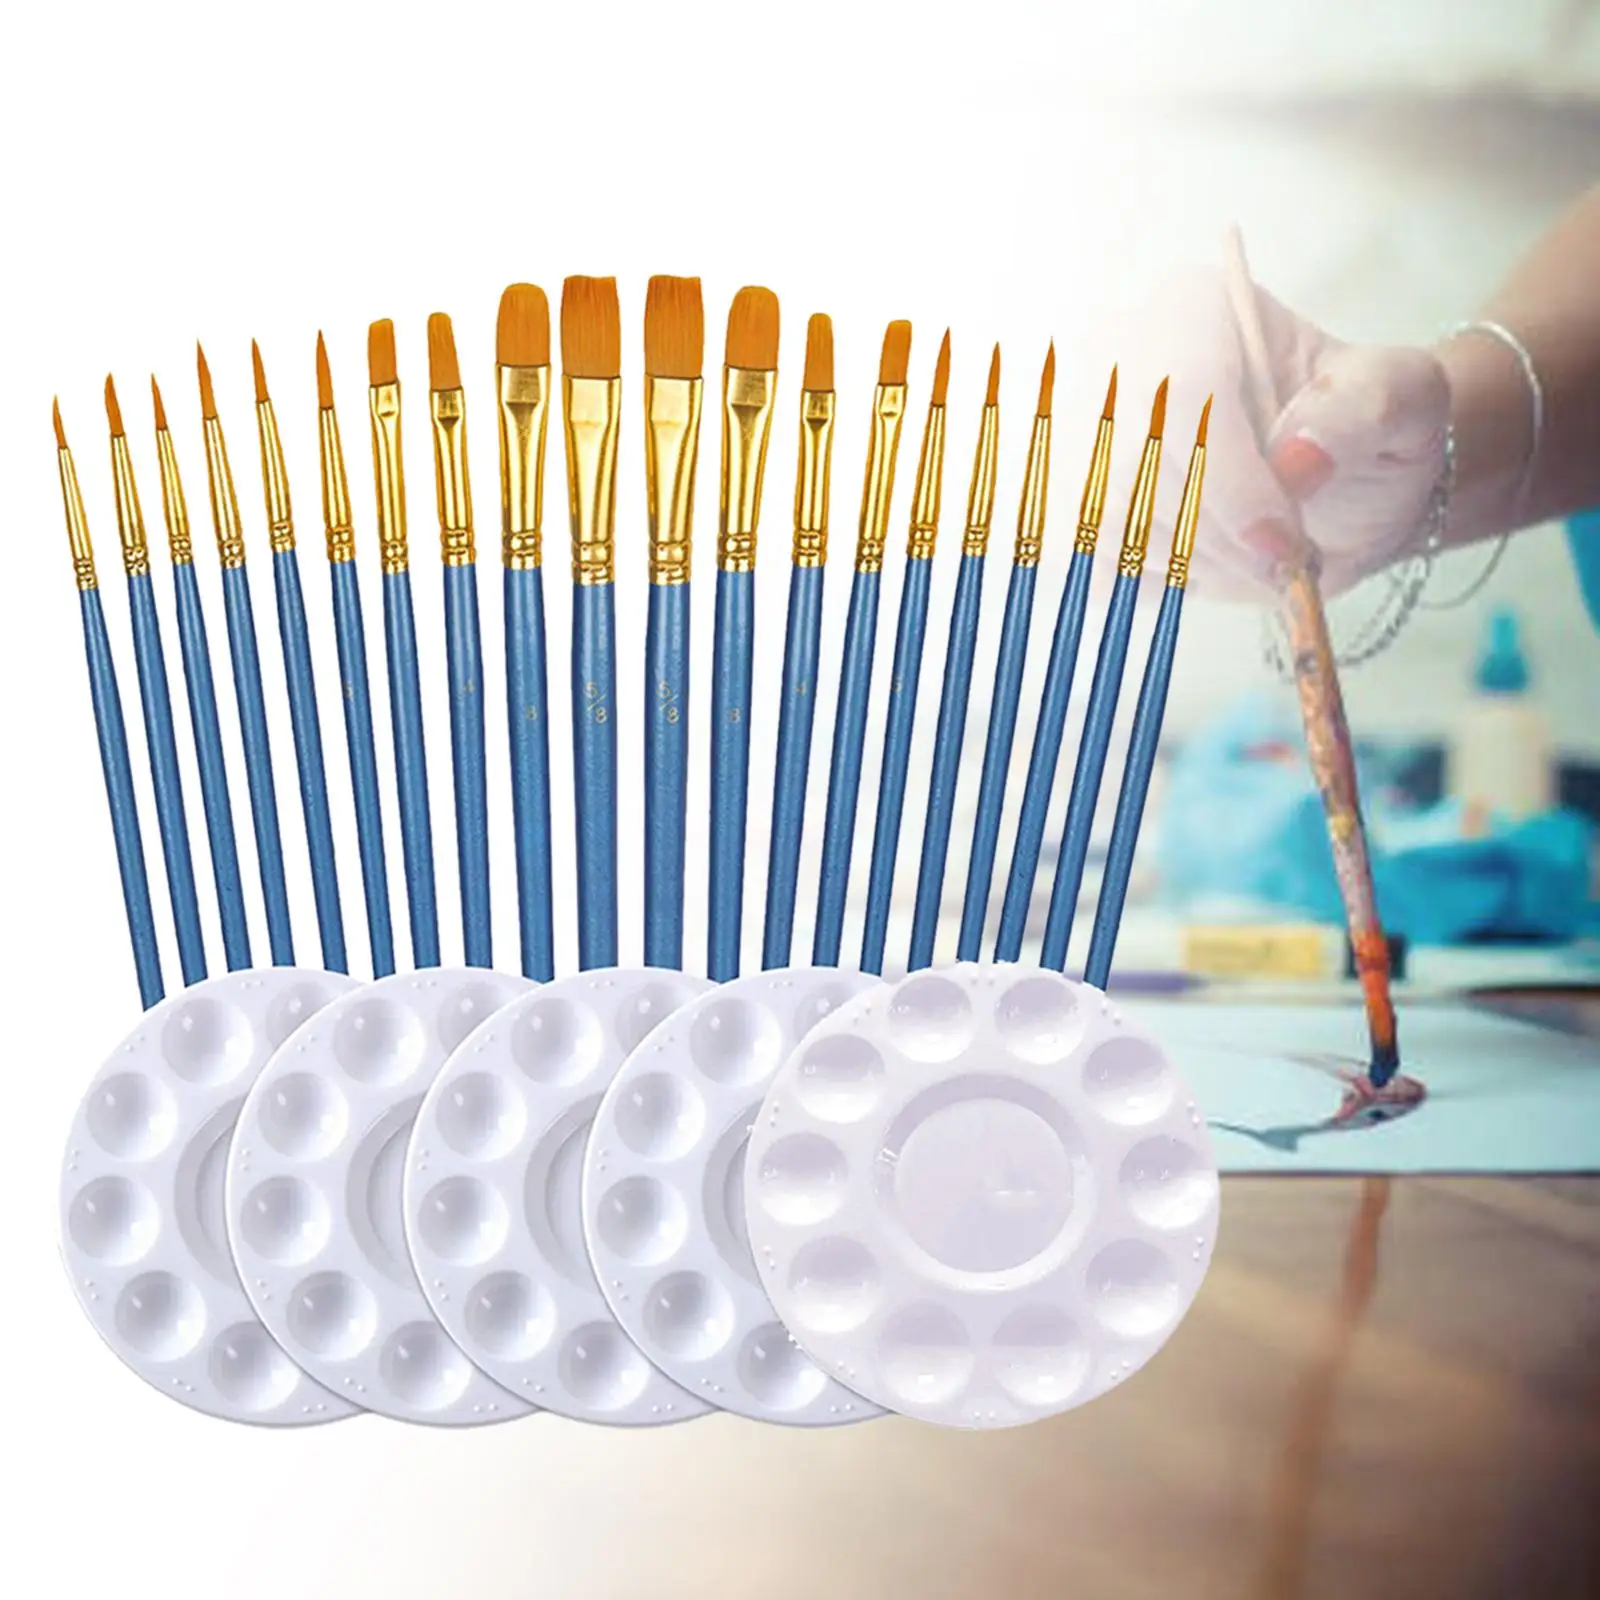 25x Paint Brushes Palette Set Acrylic Watercolor Oil Painting Tool Writing